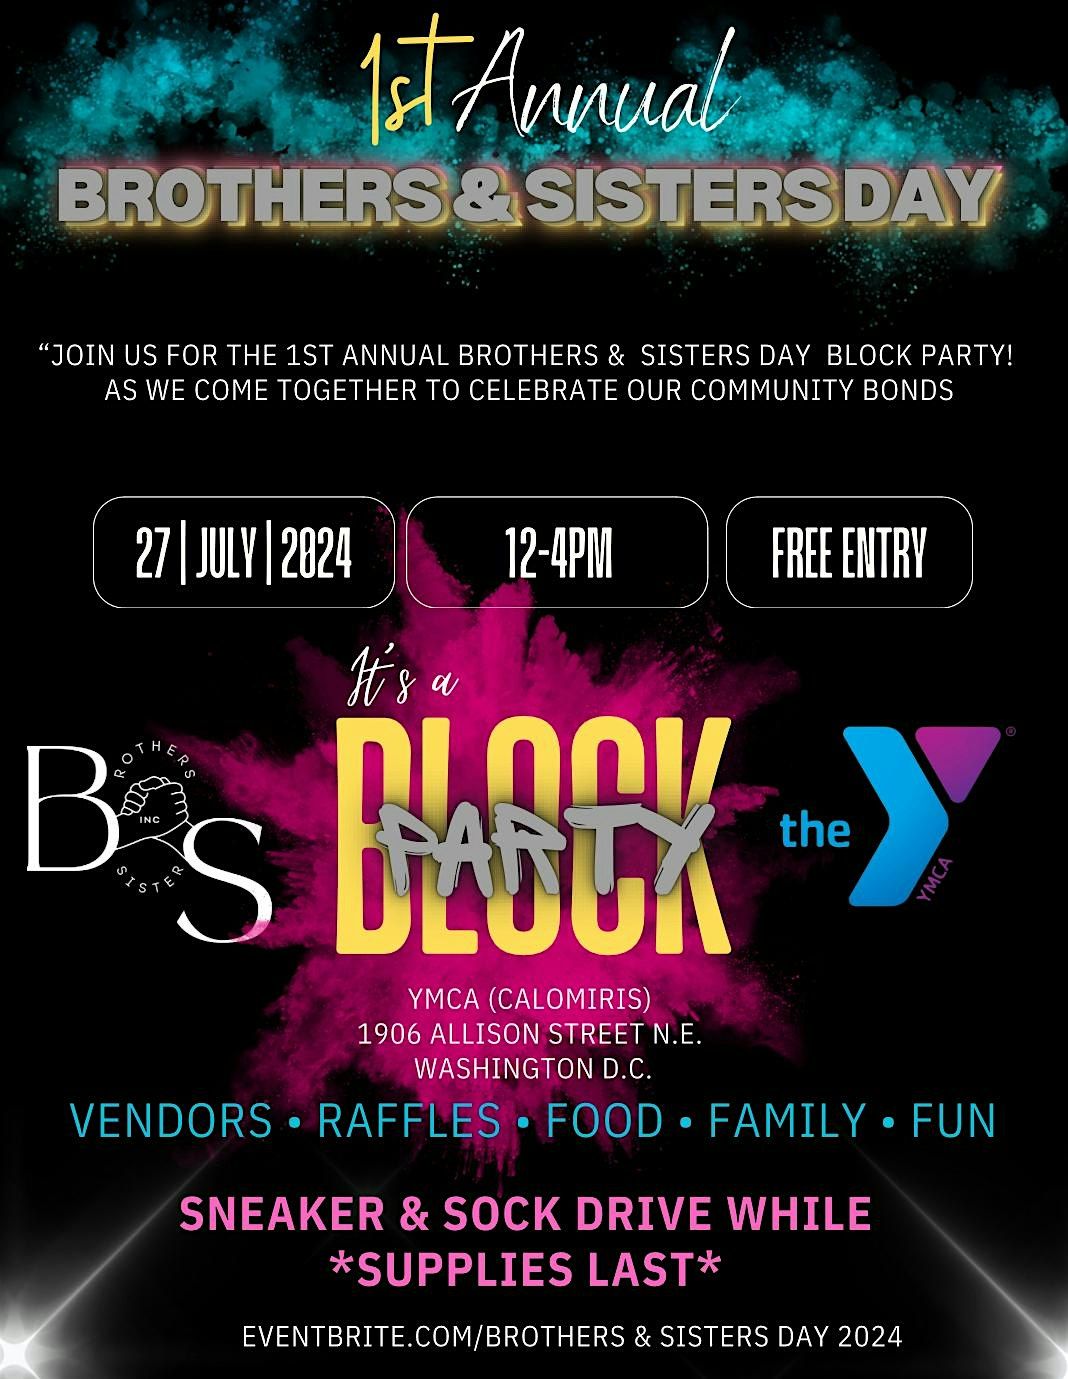 Brothers & Sisters Day 2024